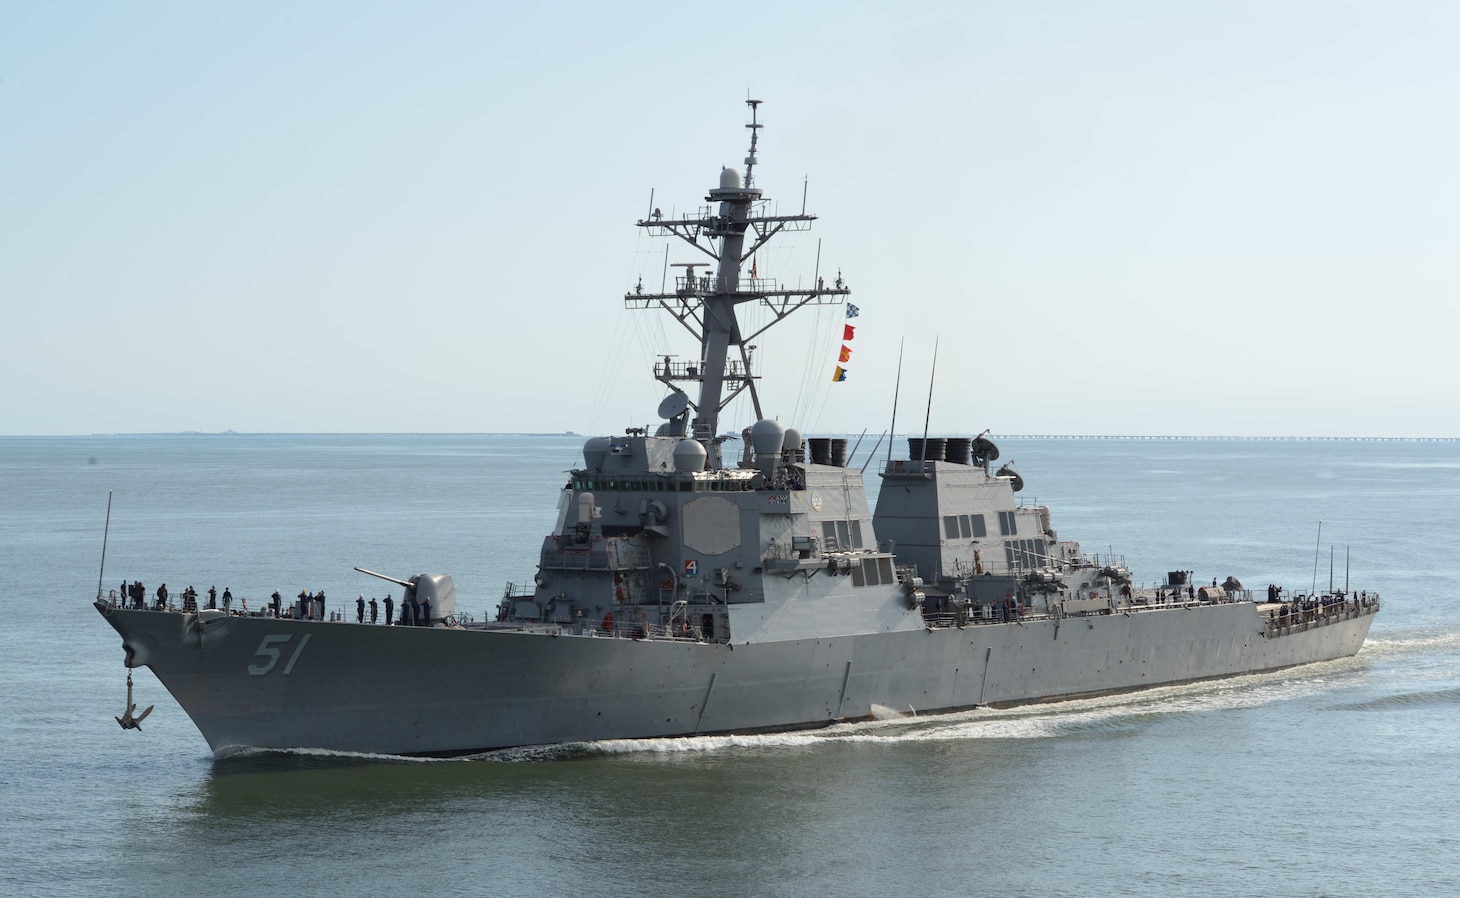 The guided-missile destroyer USS Arleigh Burke (DDG 51) transits the Chesapeake Bay on its way back into port. (U.S. Navy Photo by Mass Communication Specialist 1st Class RJ Stratchko/Released)